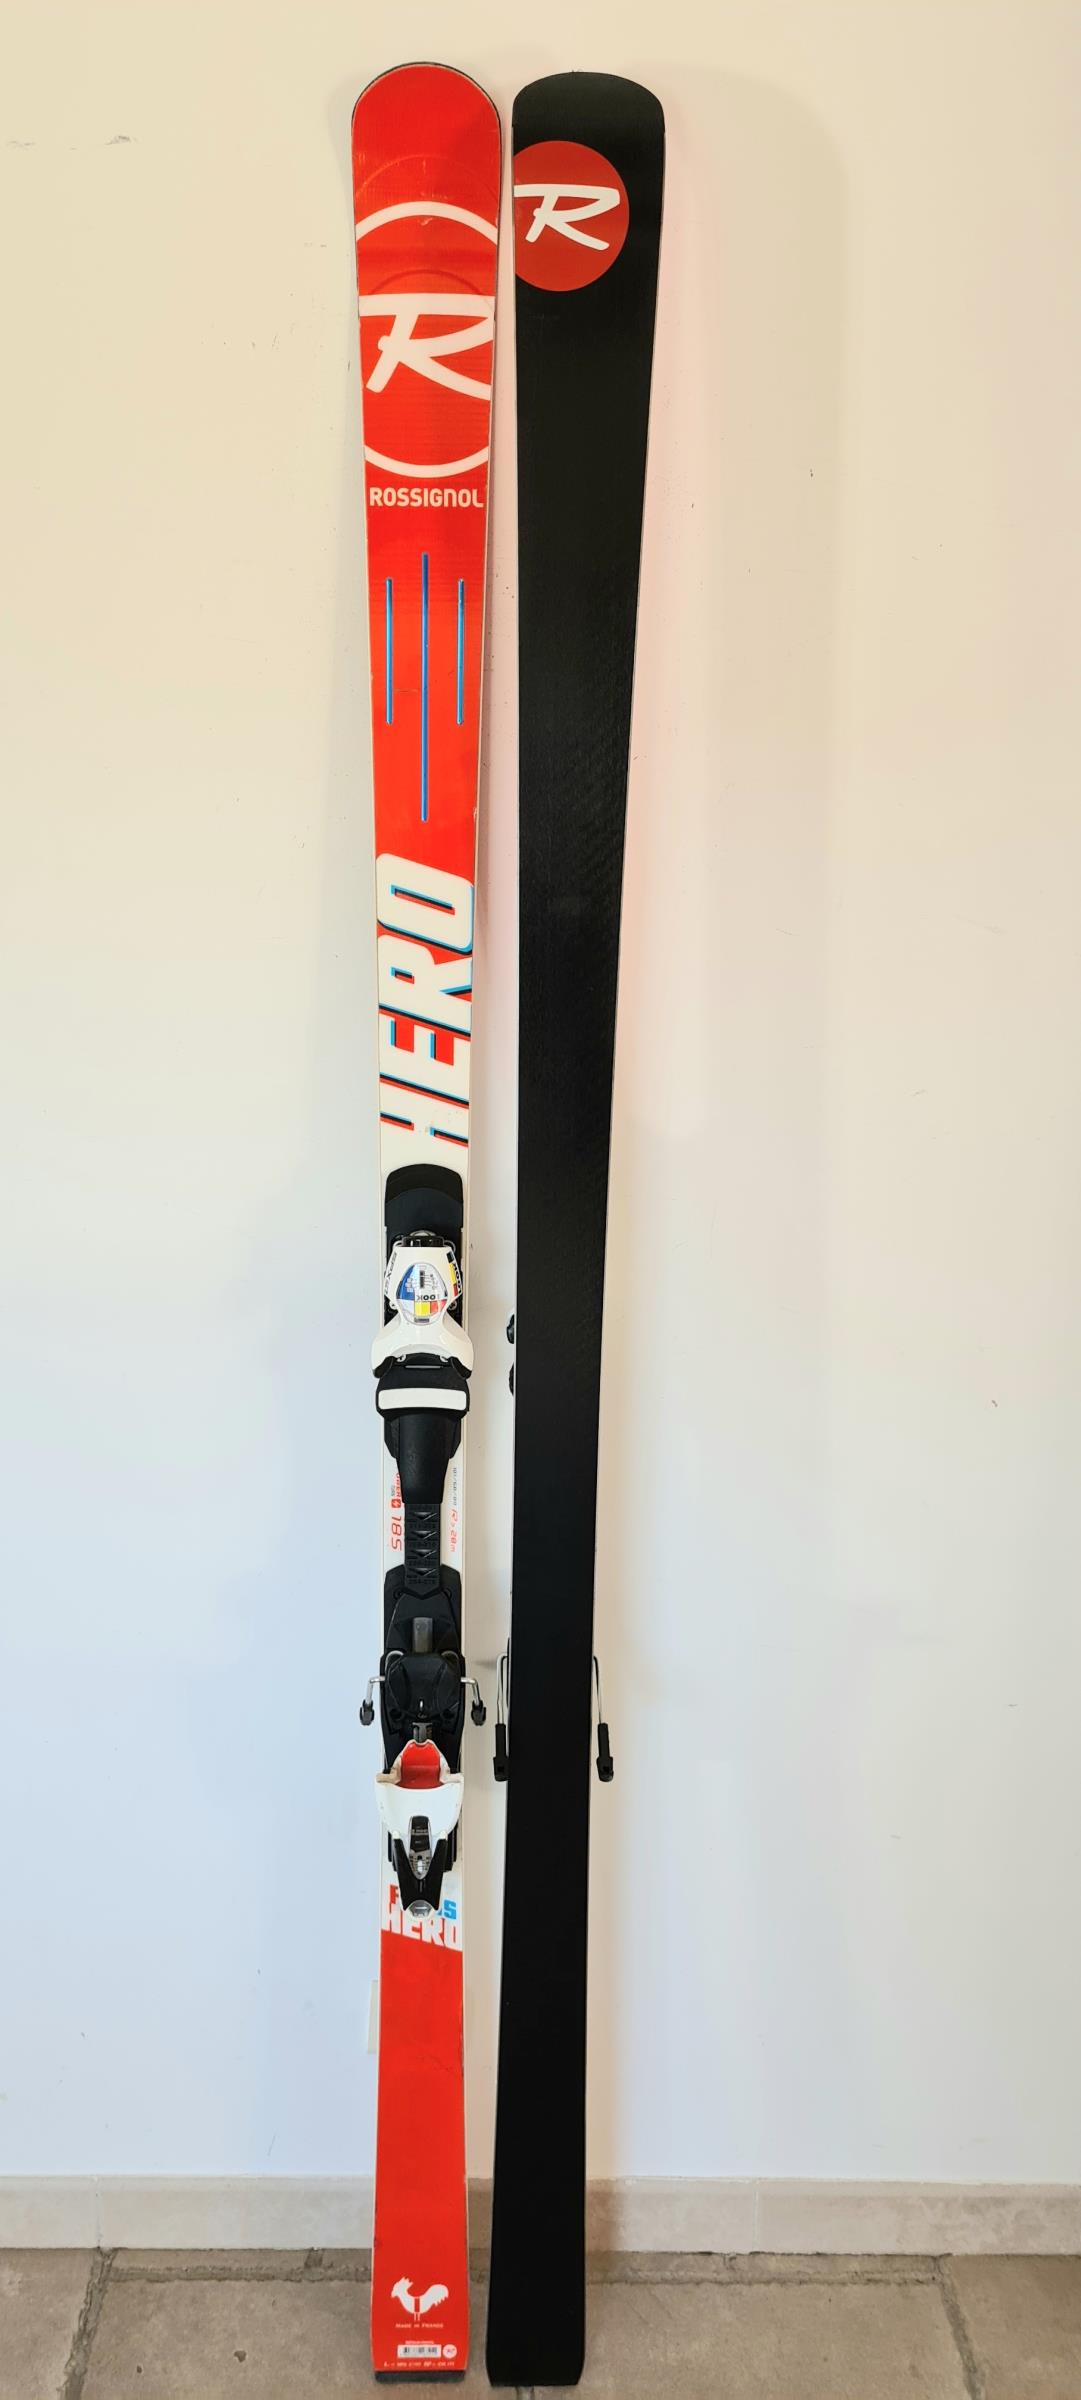 HOUSSE DE SKI ROSSIGNOL HERO WHEELED RED 2/3 PAIRES 2.10 M AN 2018